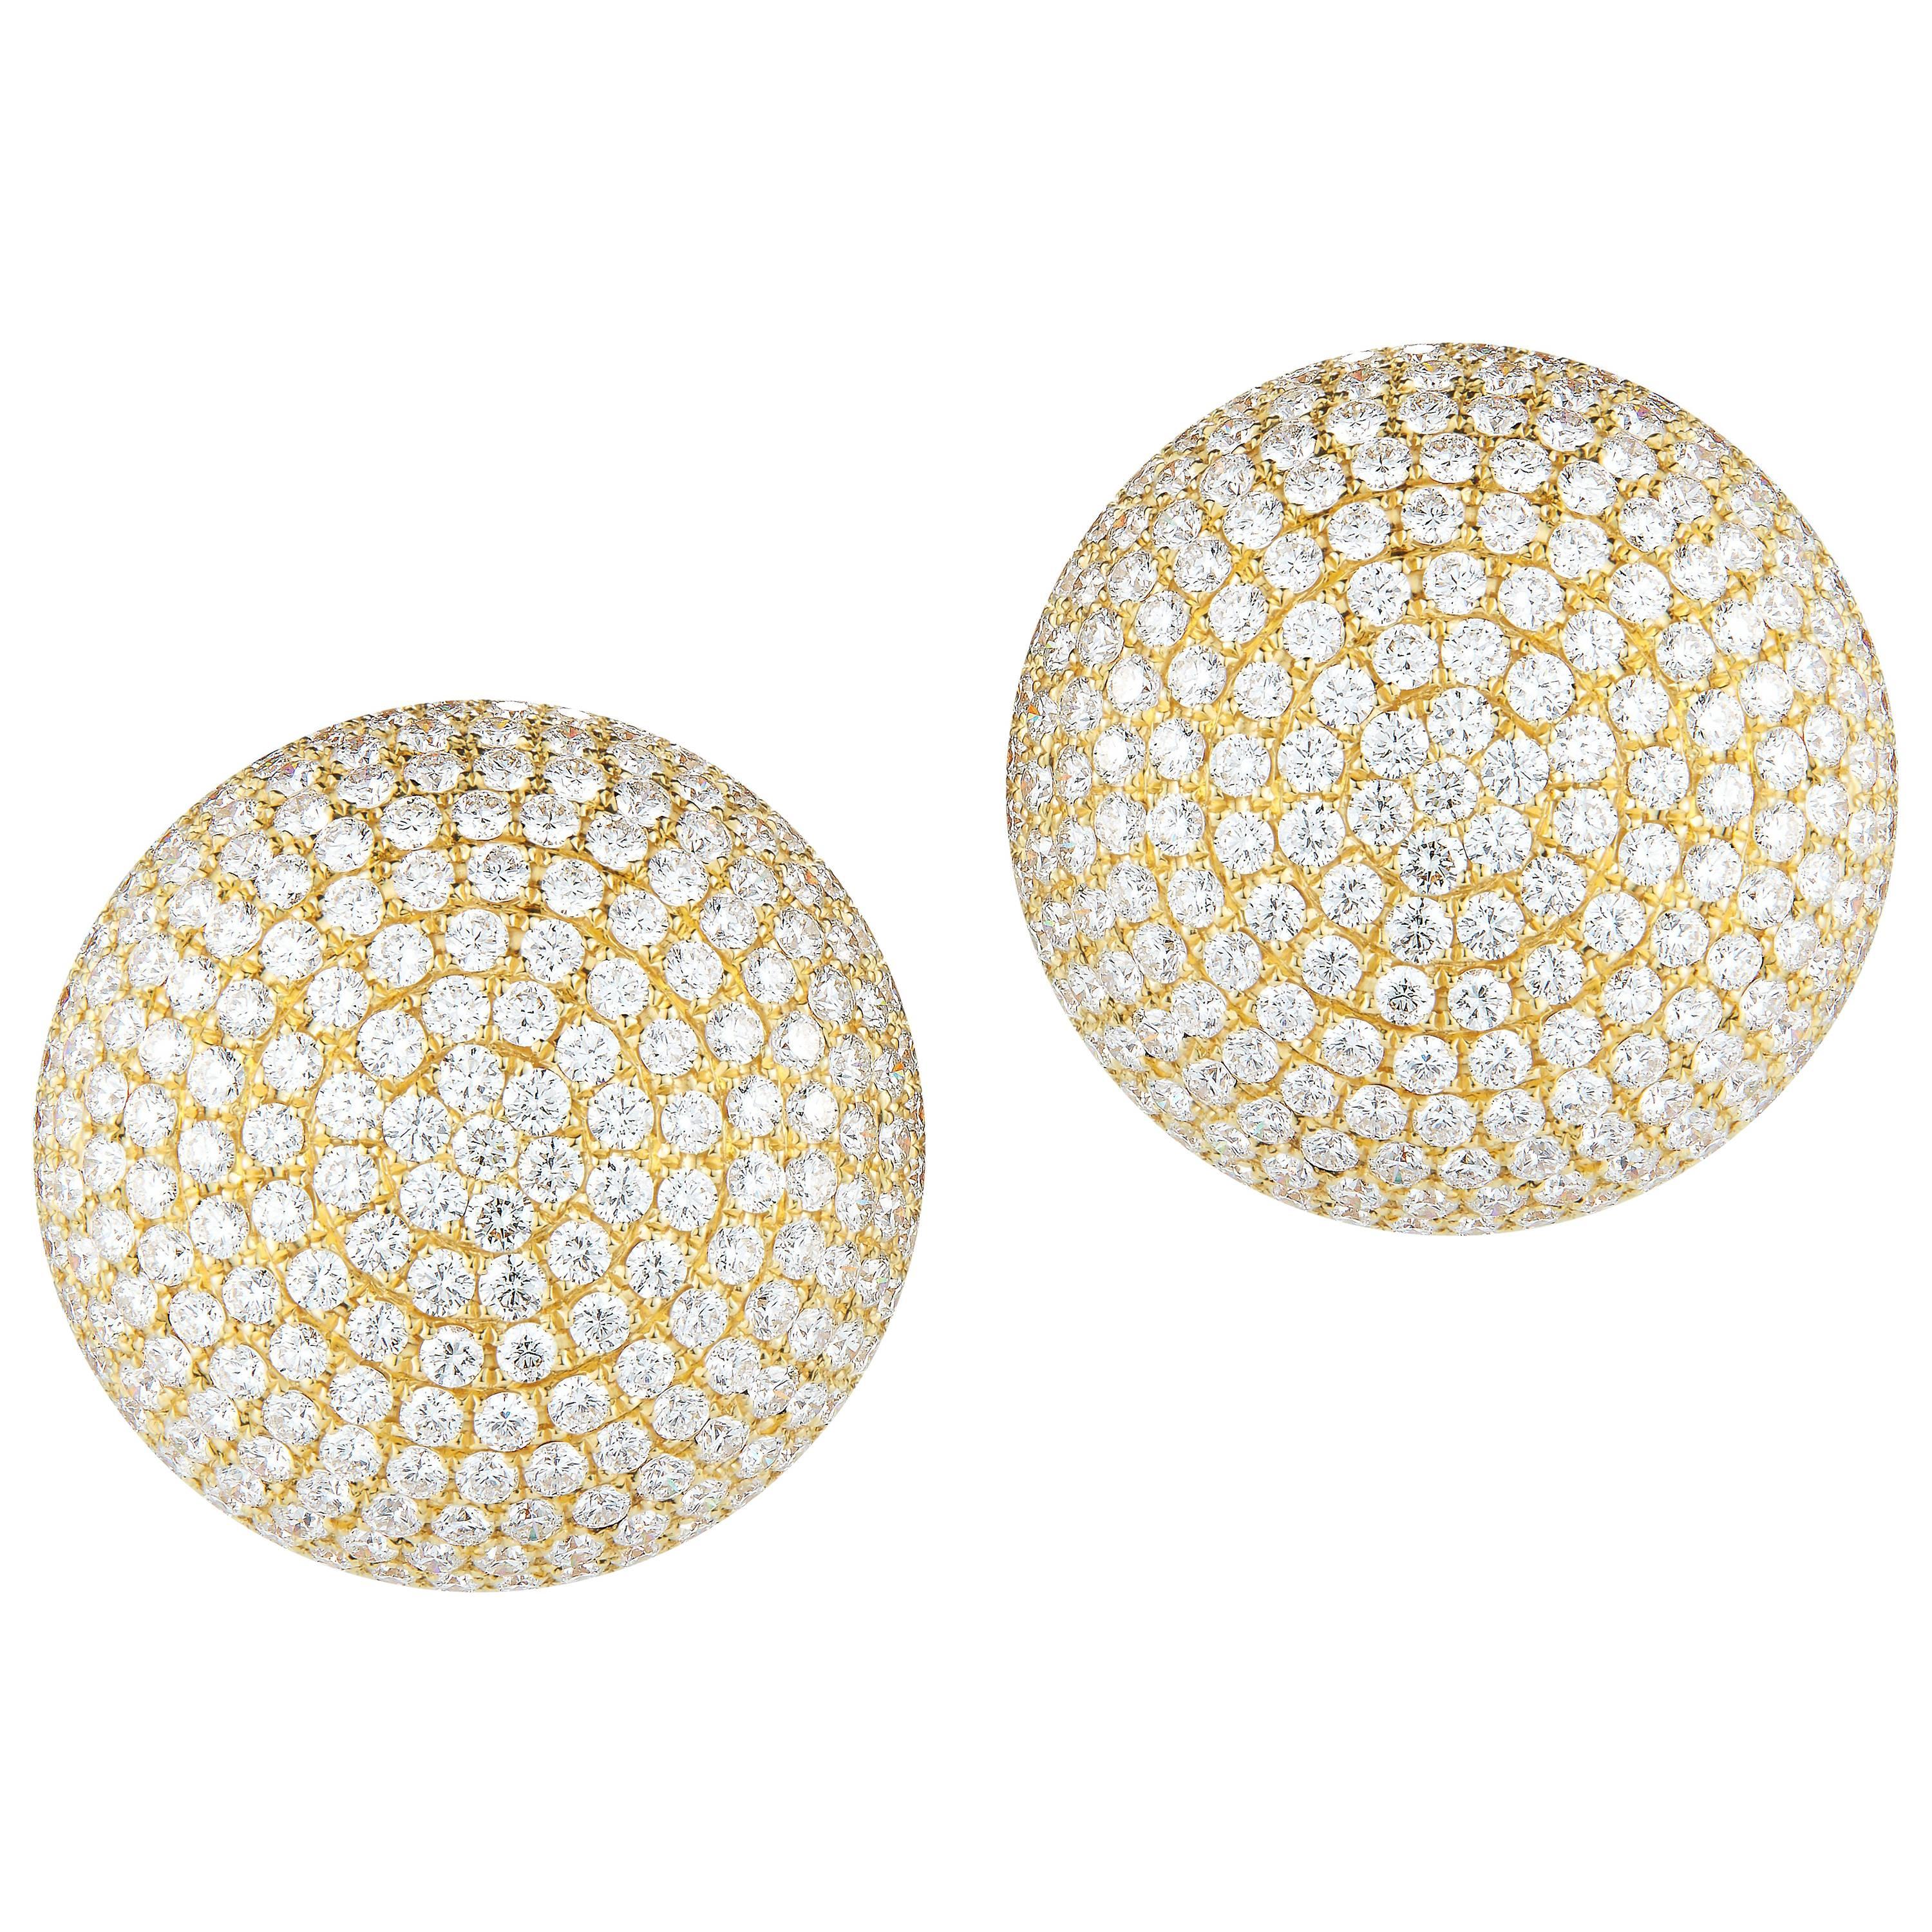 Magnificent Large Diamond Button Earrings in 18 Karat Yellow Gold